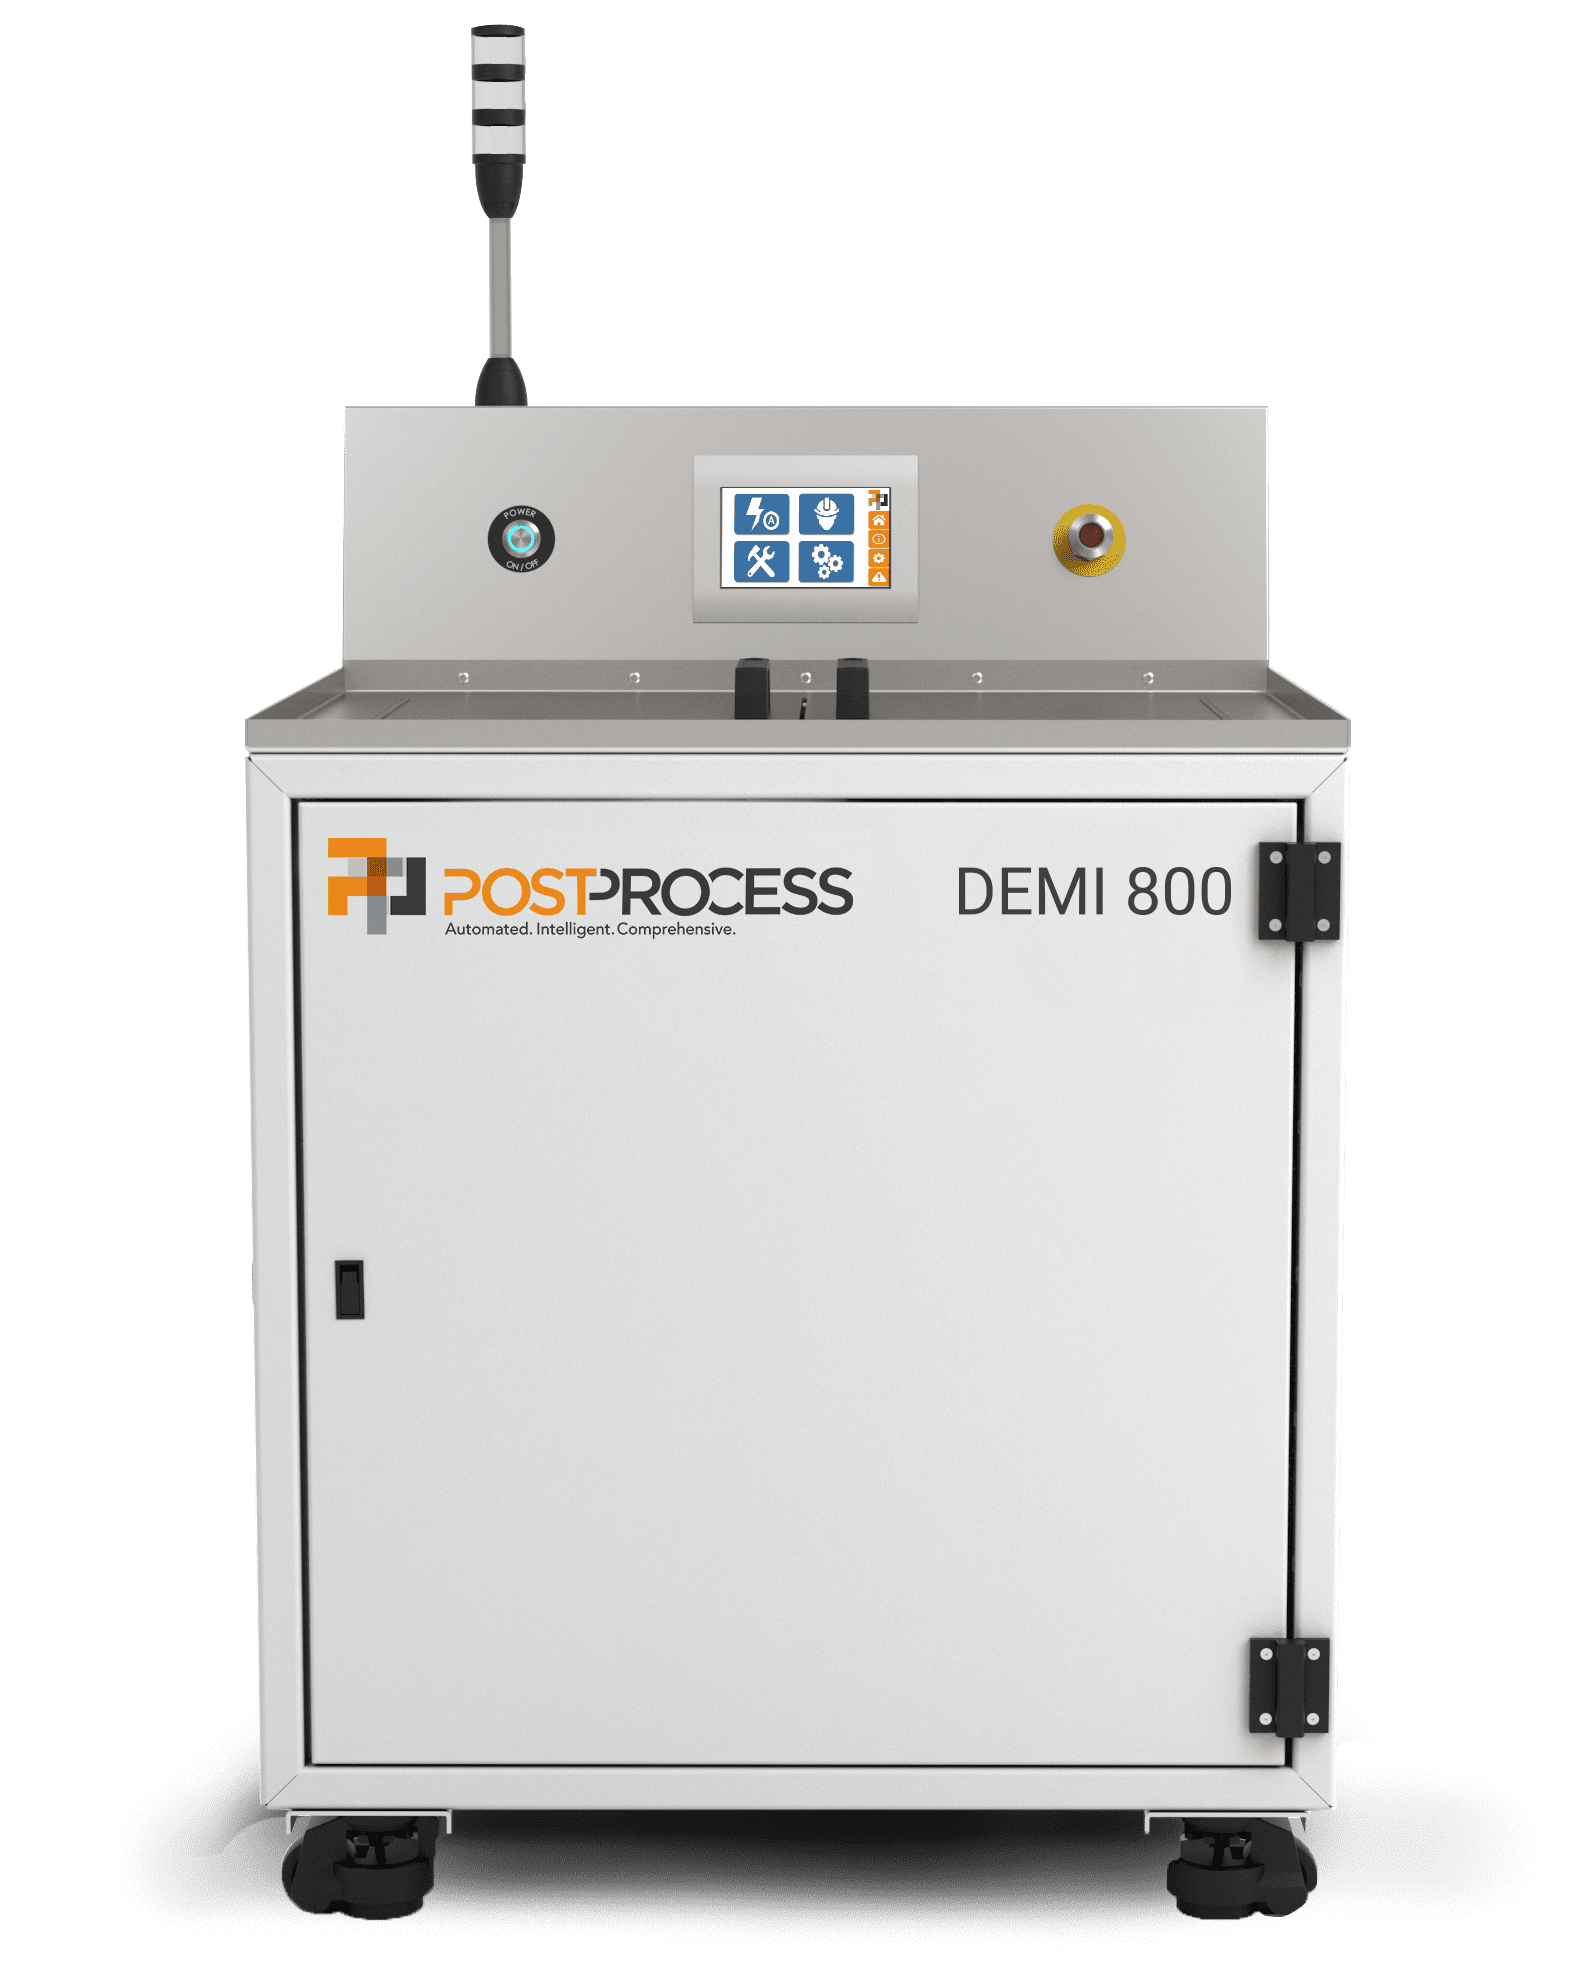 Image shows DEMI 800 post-processing machine for 3D-printed parts from PostProcess Technologies